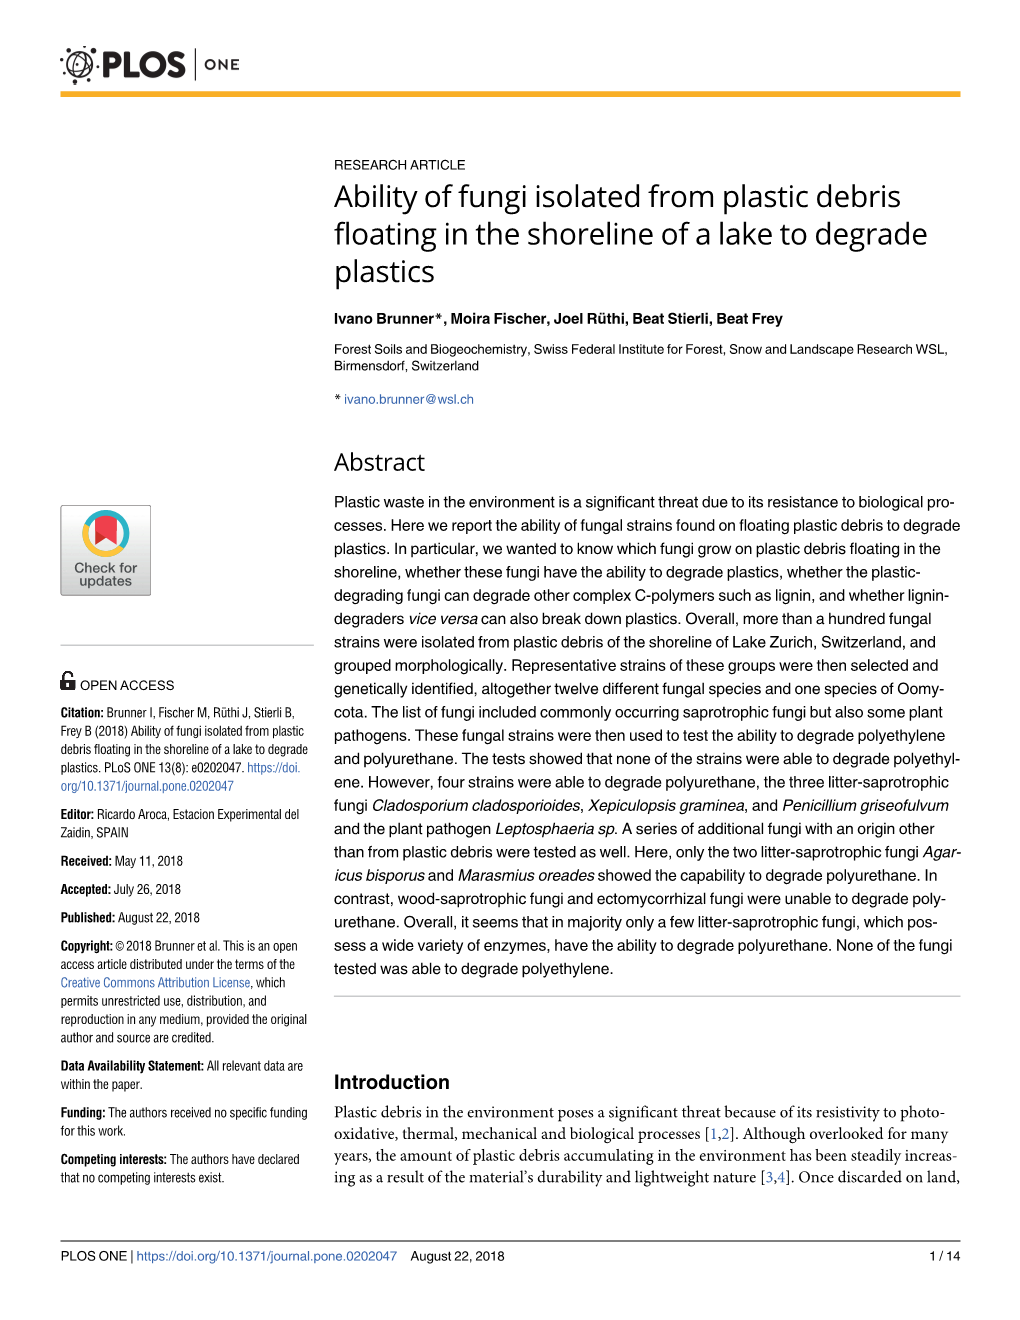 Ability of Fungi Isolated from Plastic Debris Floating in the Shoreline of a Lake to Degrade Plastics